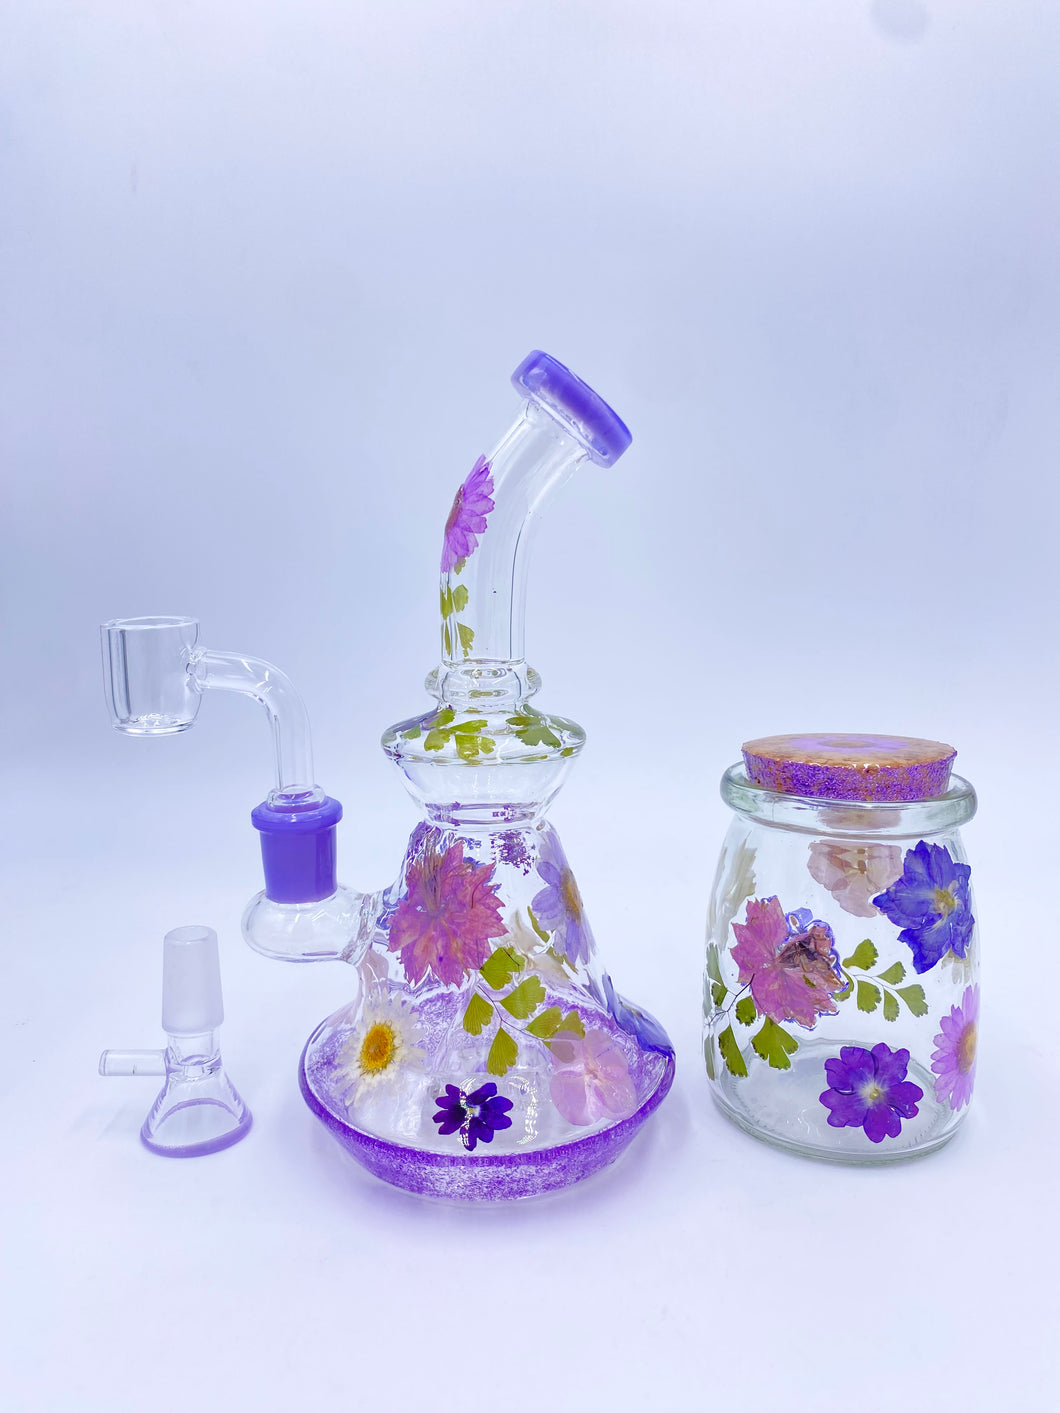 Flower bong or dab rig covered in real flowers